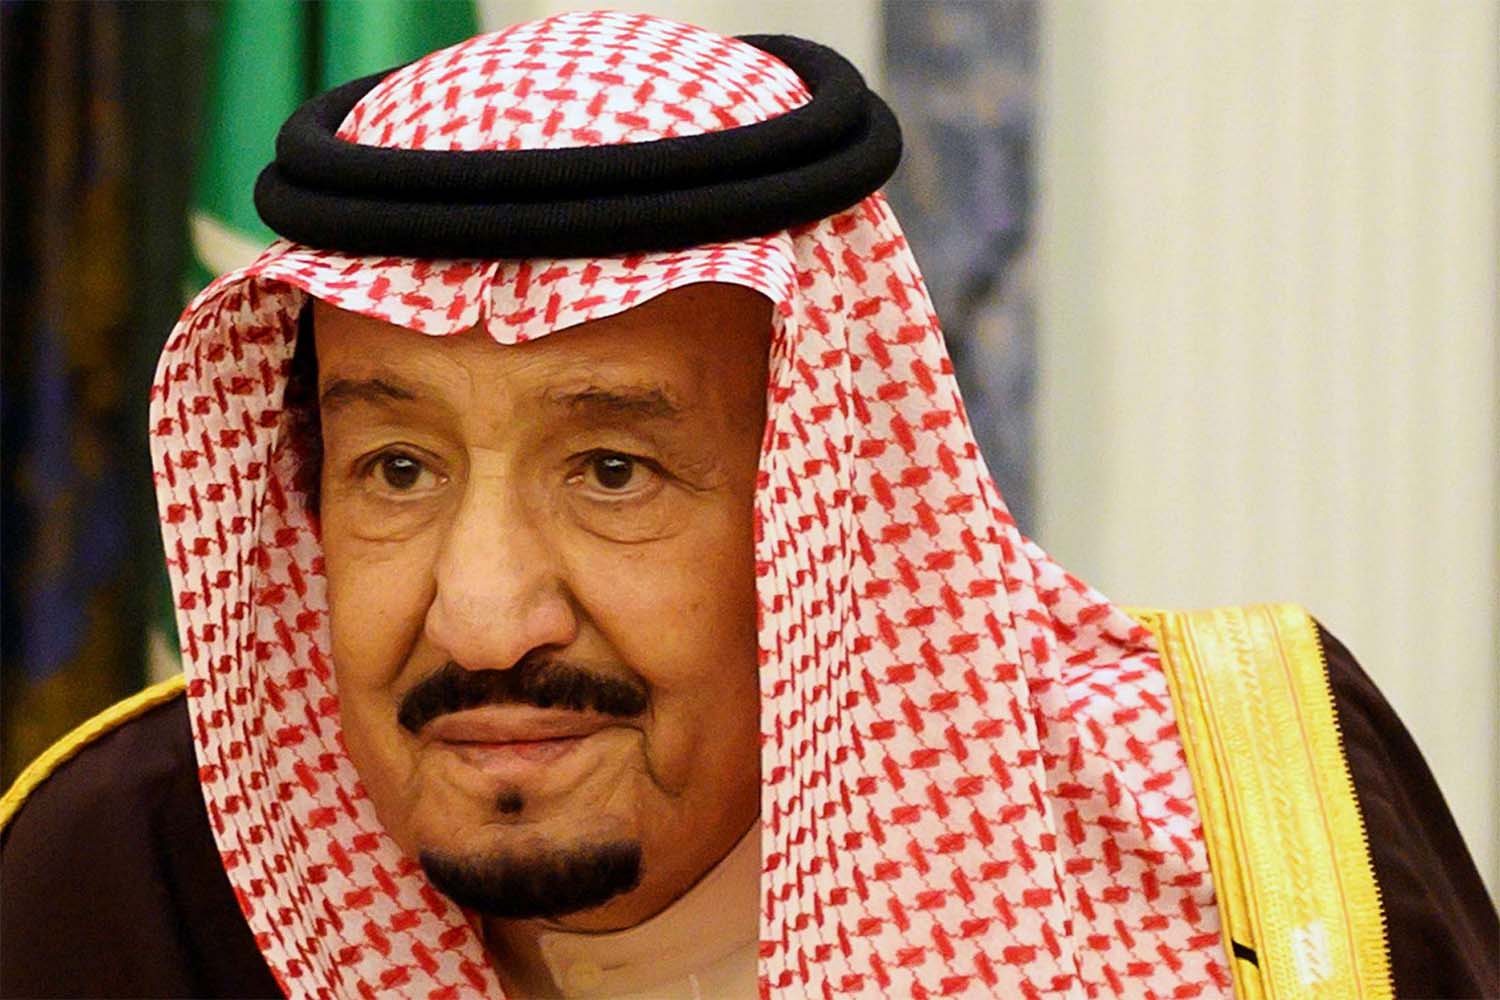 King Salman will remain in hospital for some time after the "successful" surgery